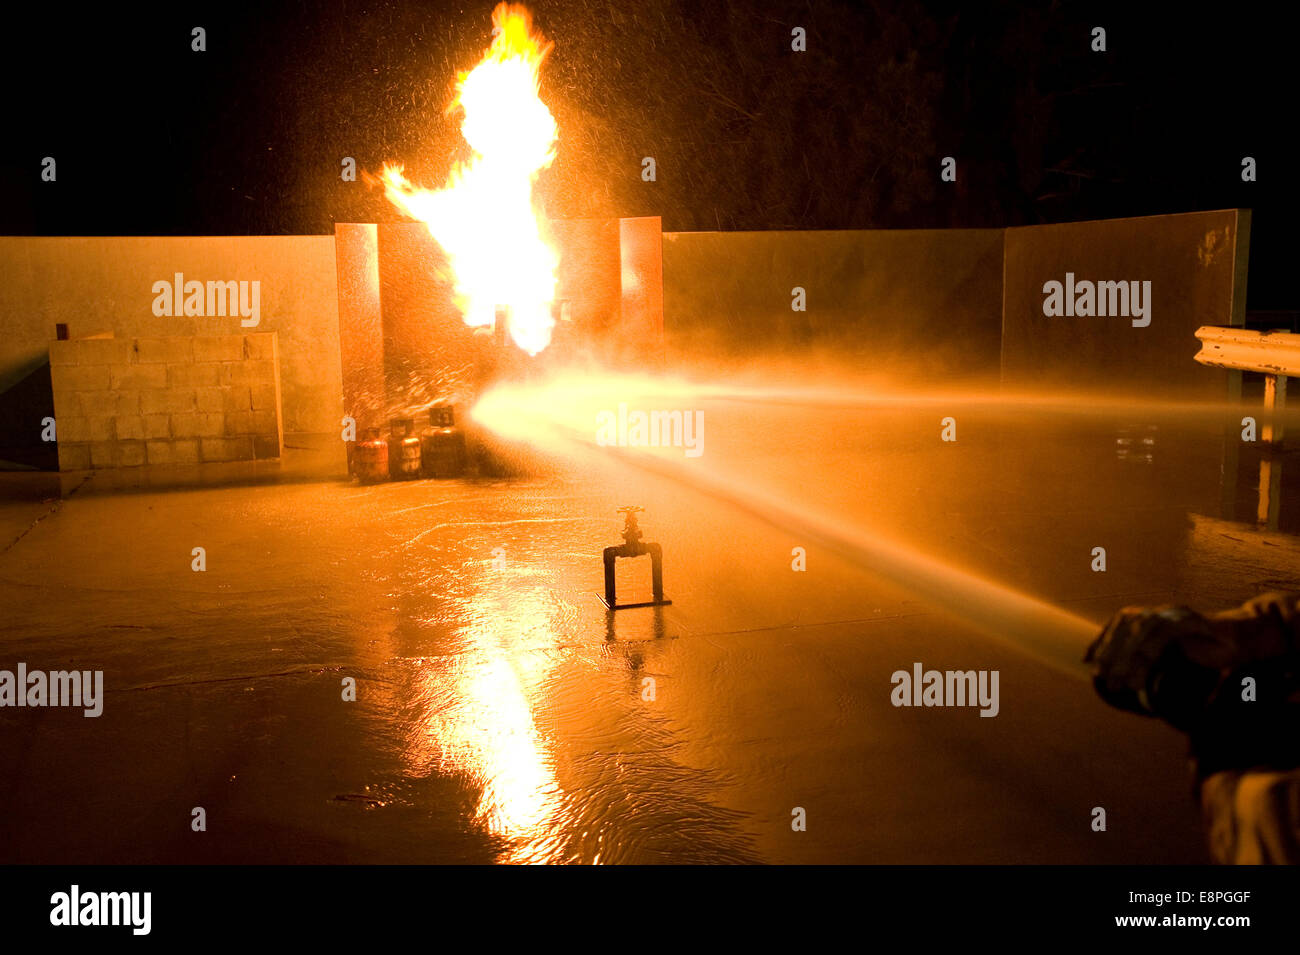 firefighters attack a gas fire Stock Photo